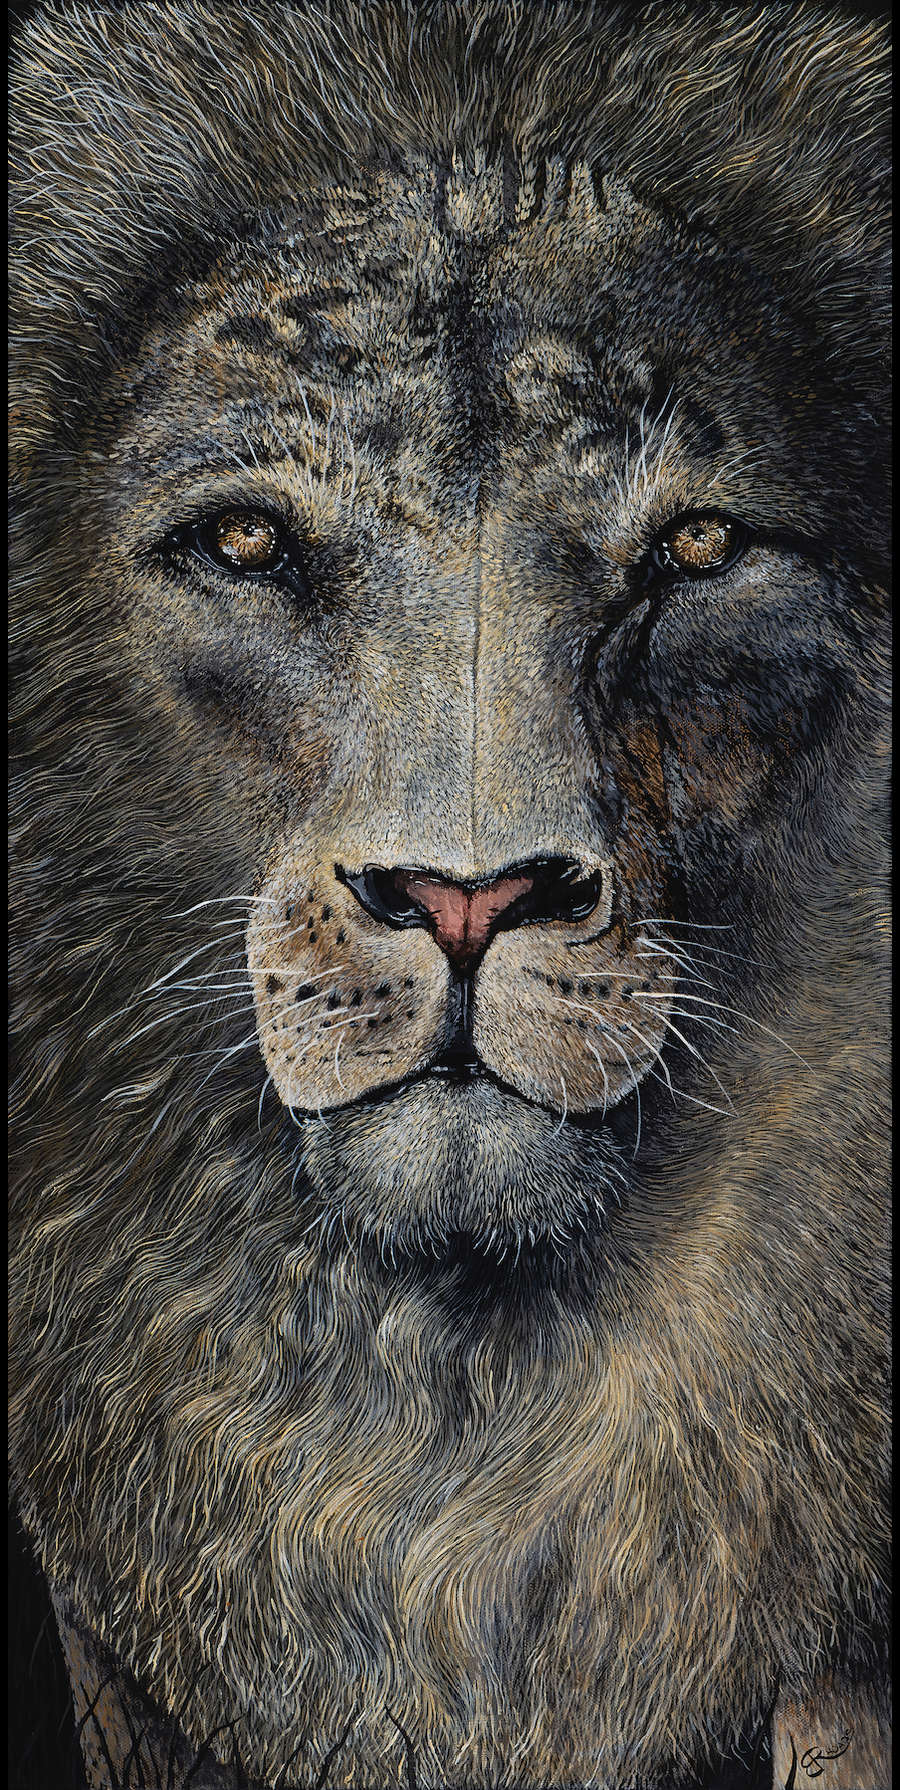 15"x30"  A beautiful paper print of my animal portrait painting, La Mirada. I spent hundreds of hours on the original painting, and feel like the prints do a good job capturing what I put into this contemporary piece of animal art. 